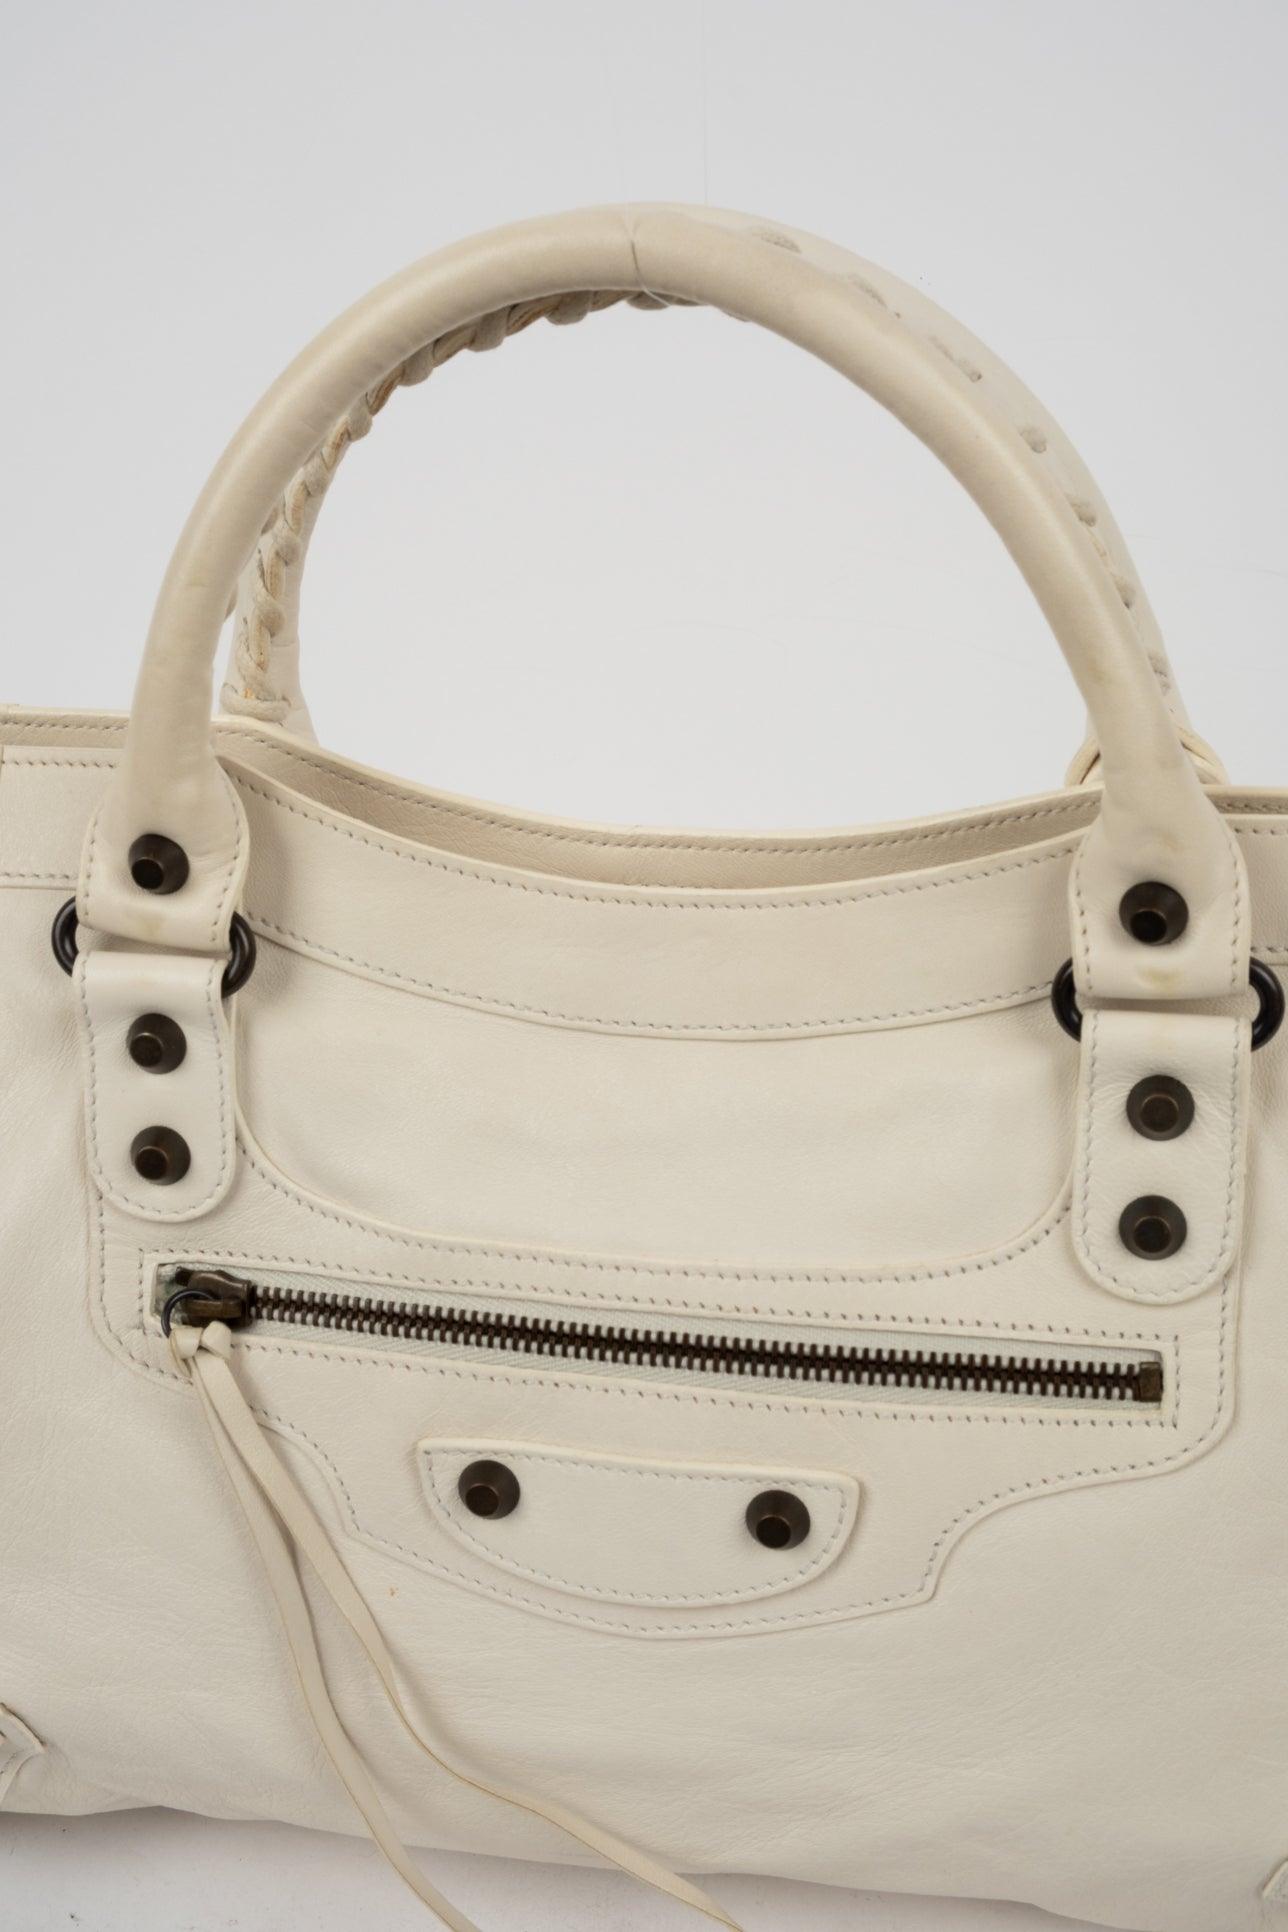 White Leather City Bag - Volver